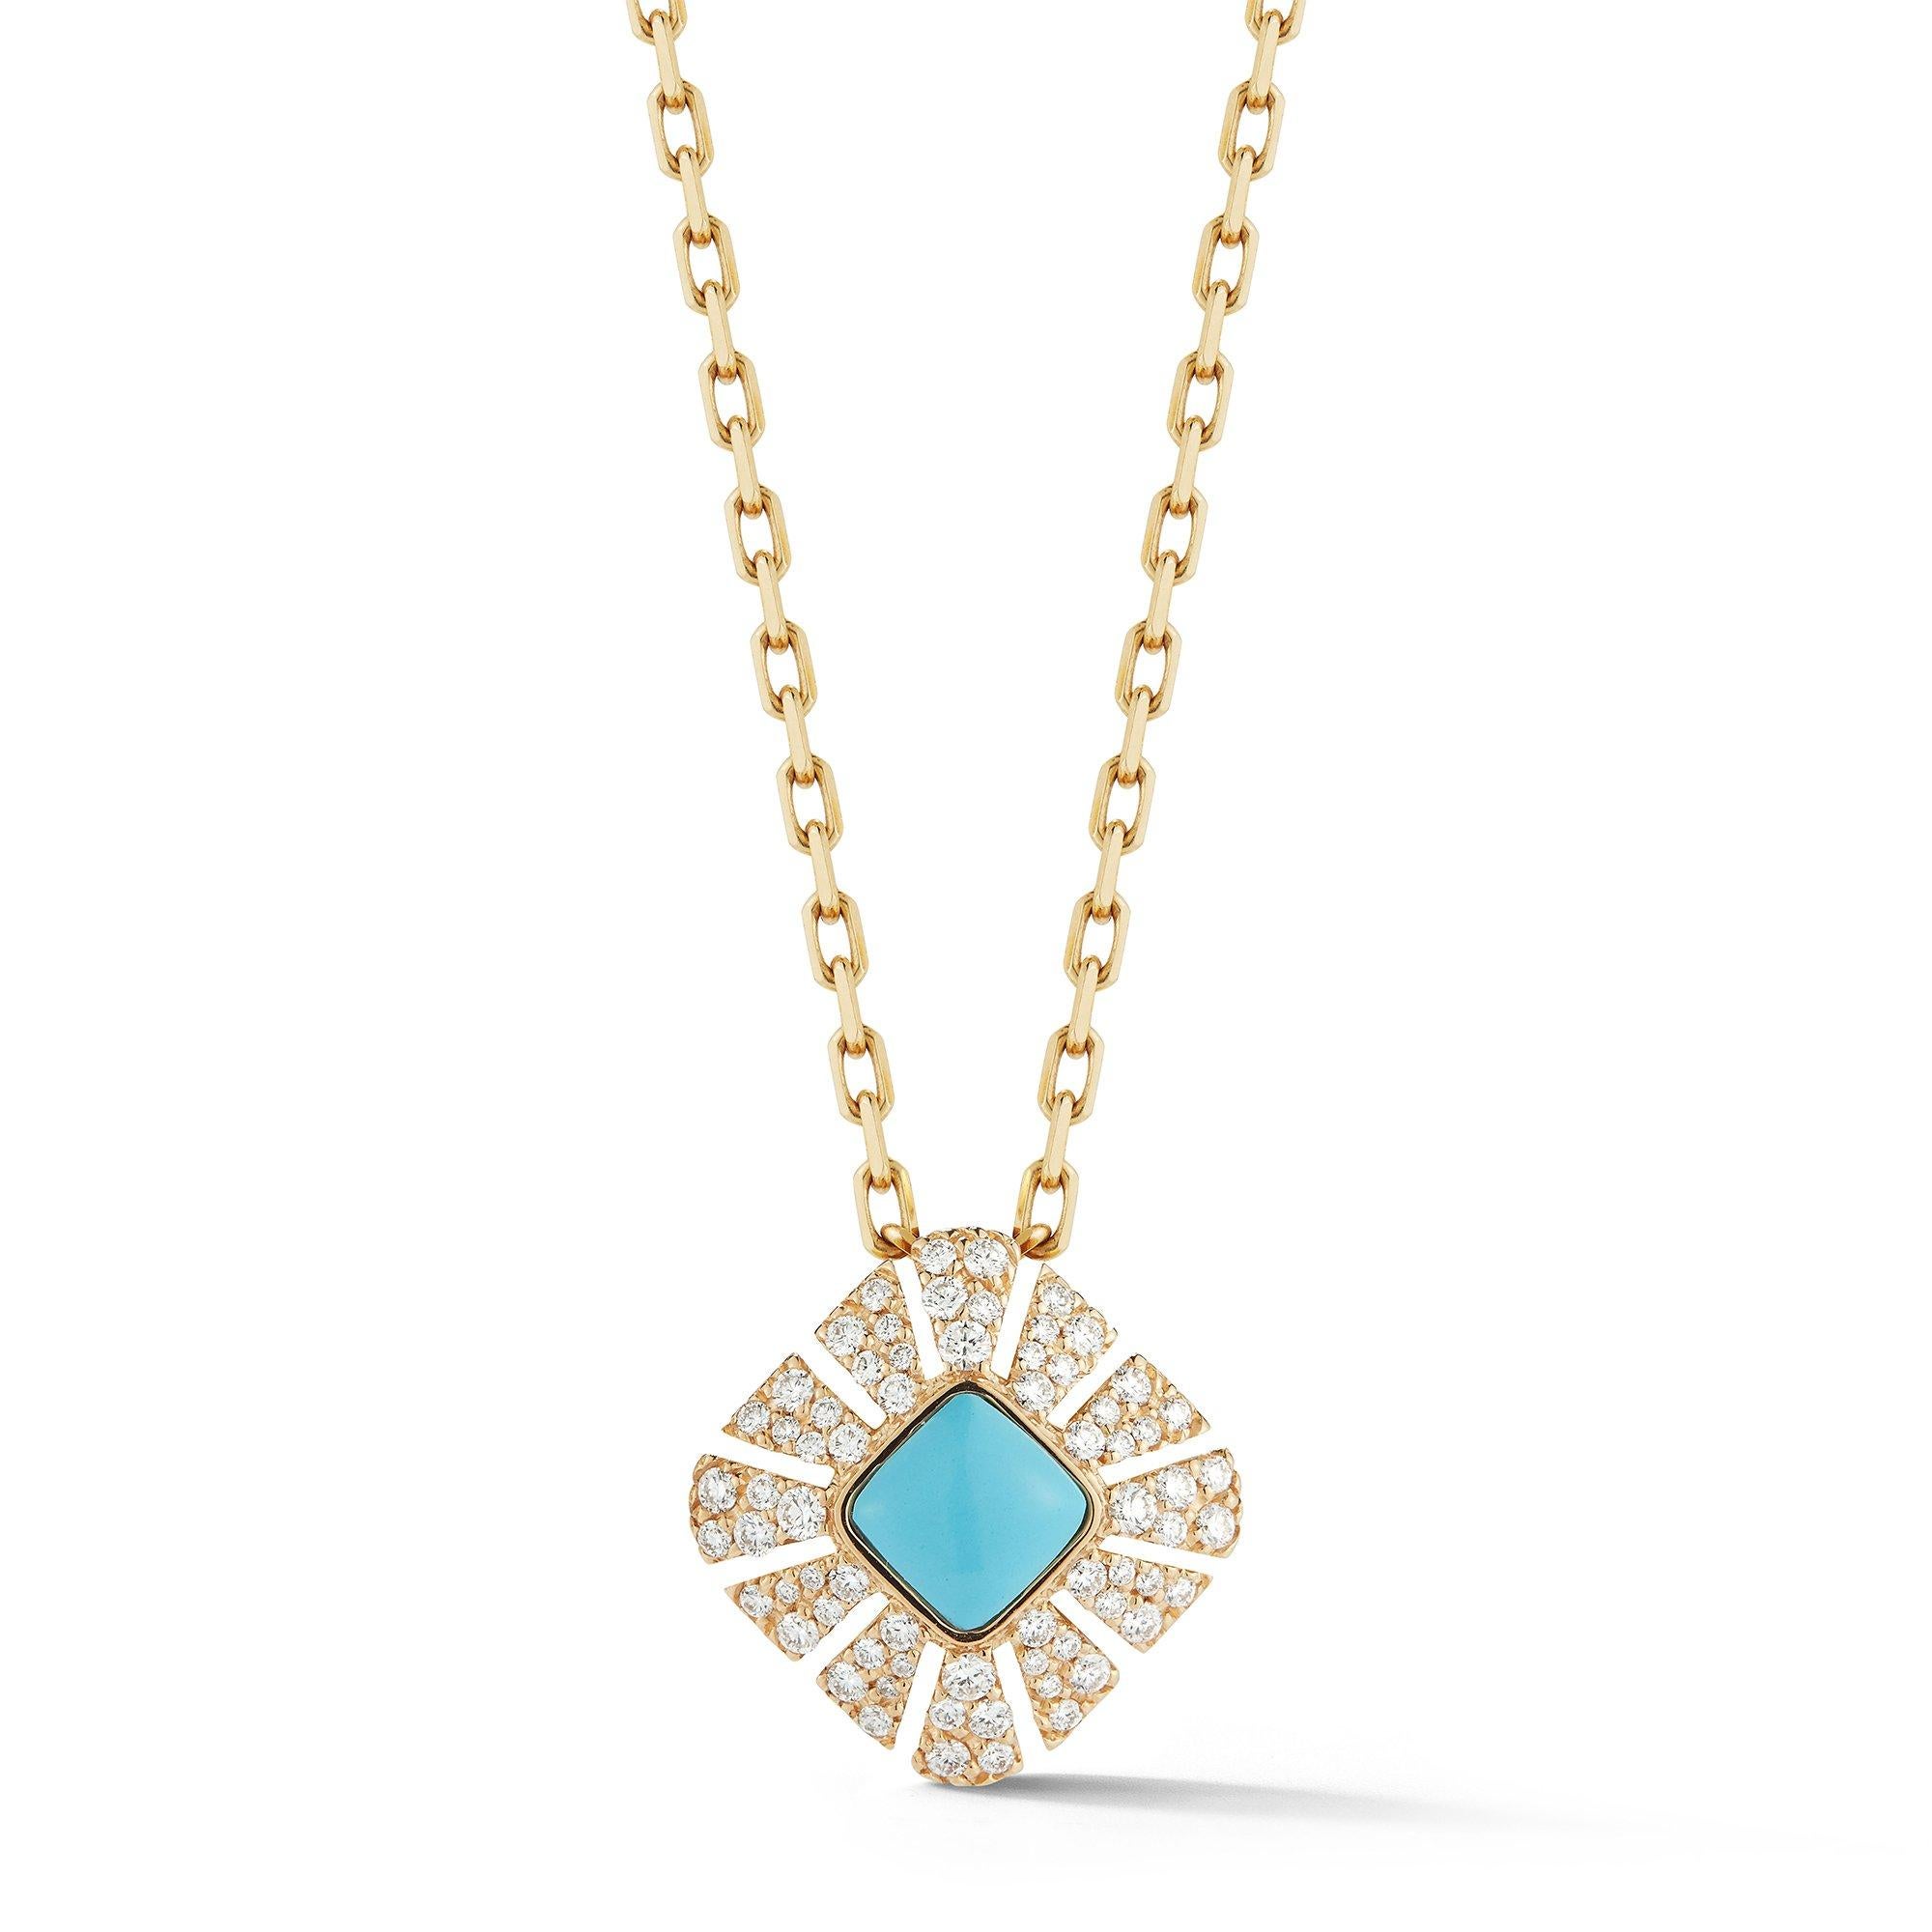 Pendant in 18K Yellow Gold with White Pave Diamonds and Turquoise Center Stone In New Condition For Sale In Huntington, NY